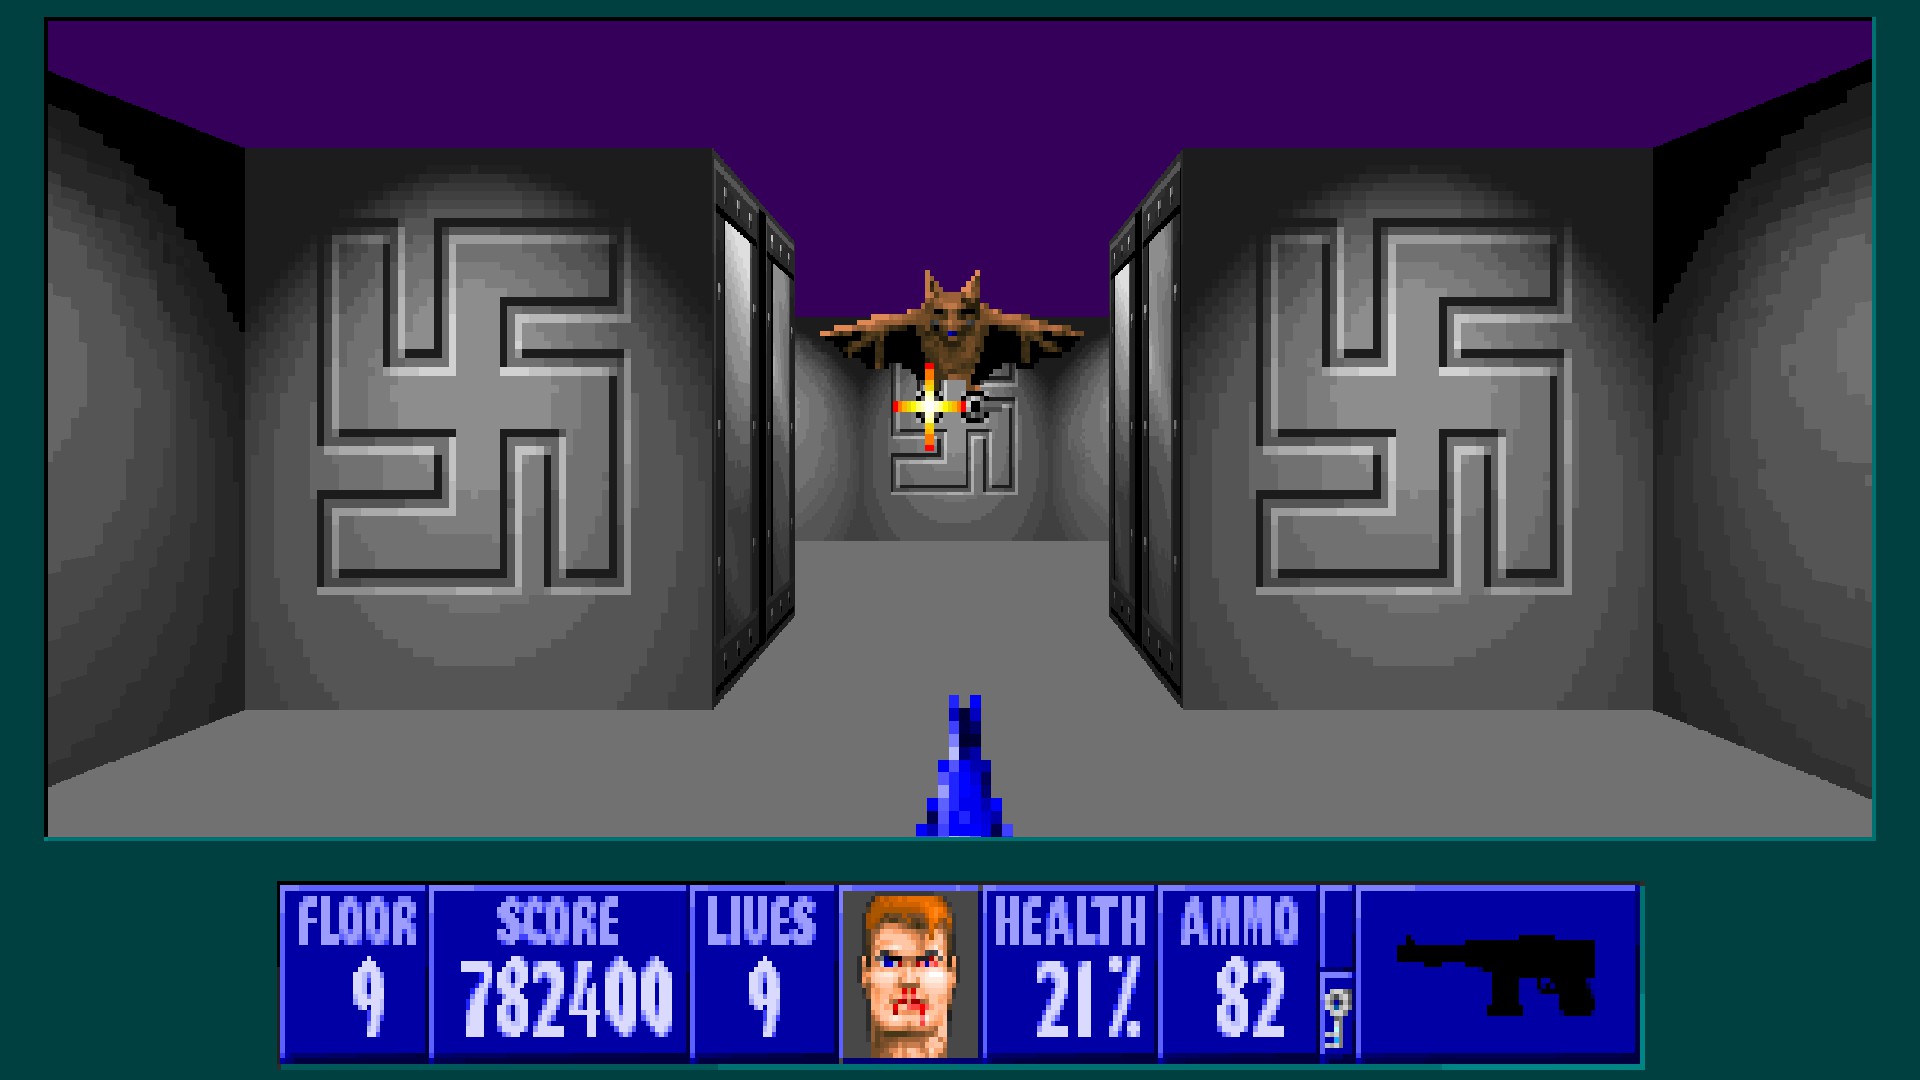 Wolfenstein 3D and Spear of Destiny game